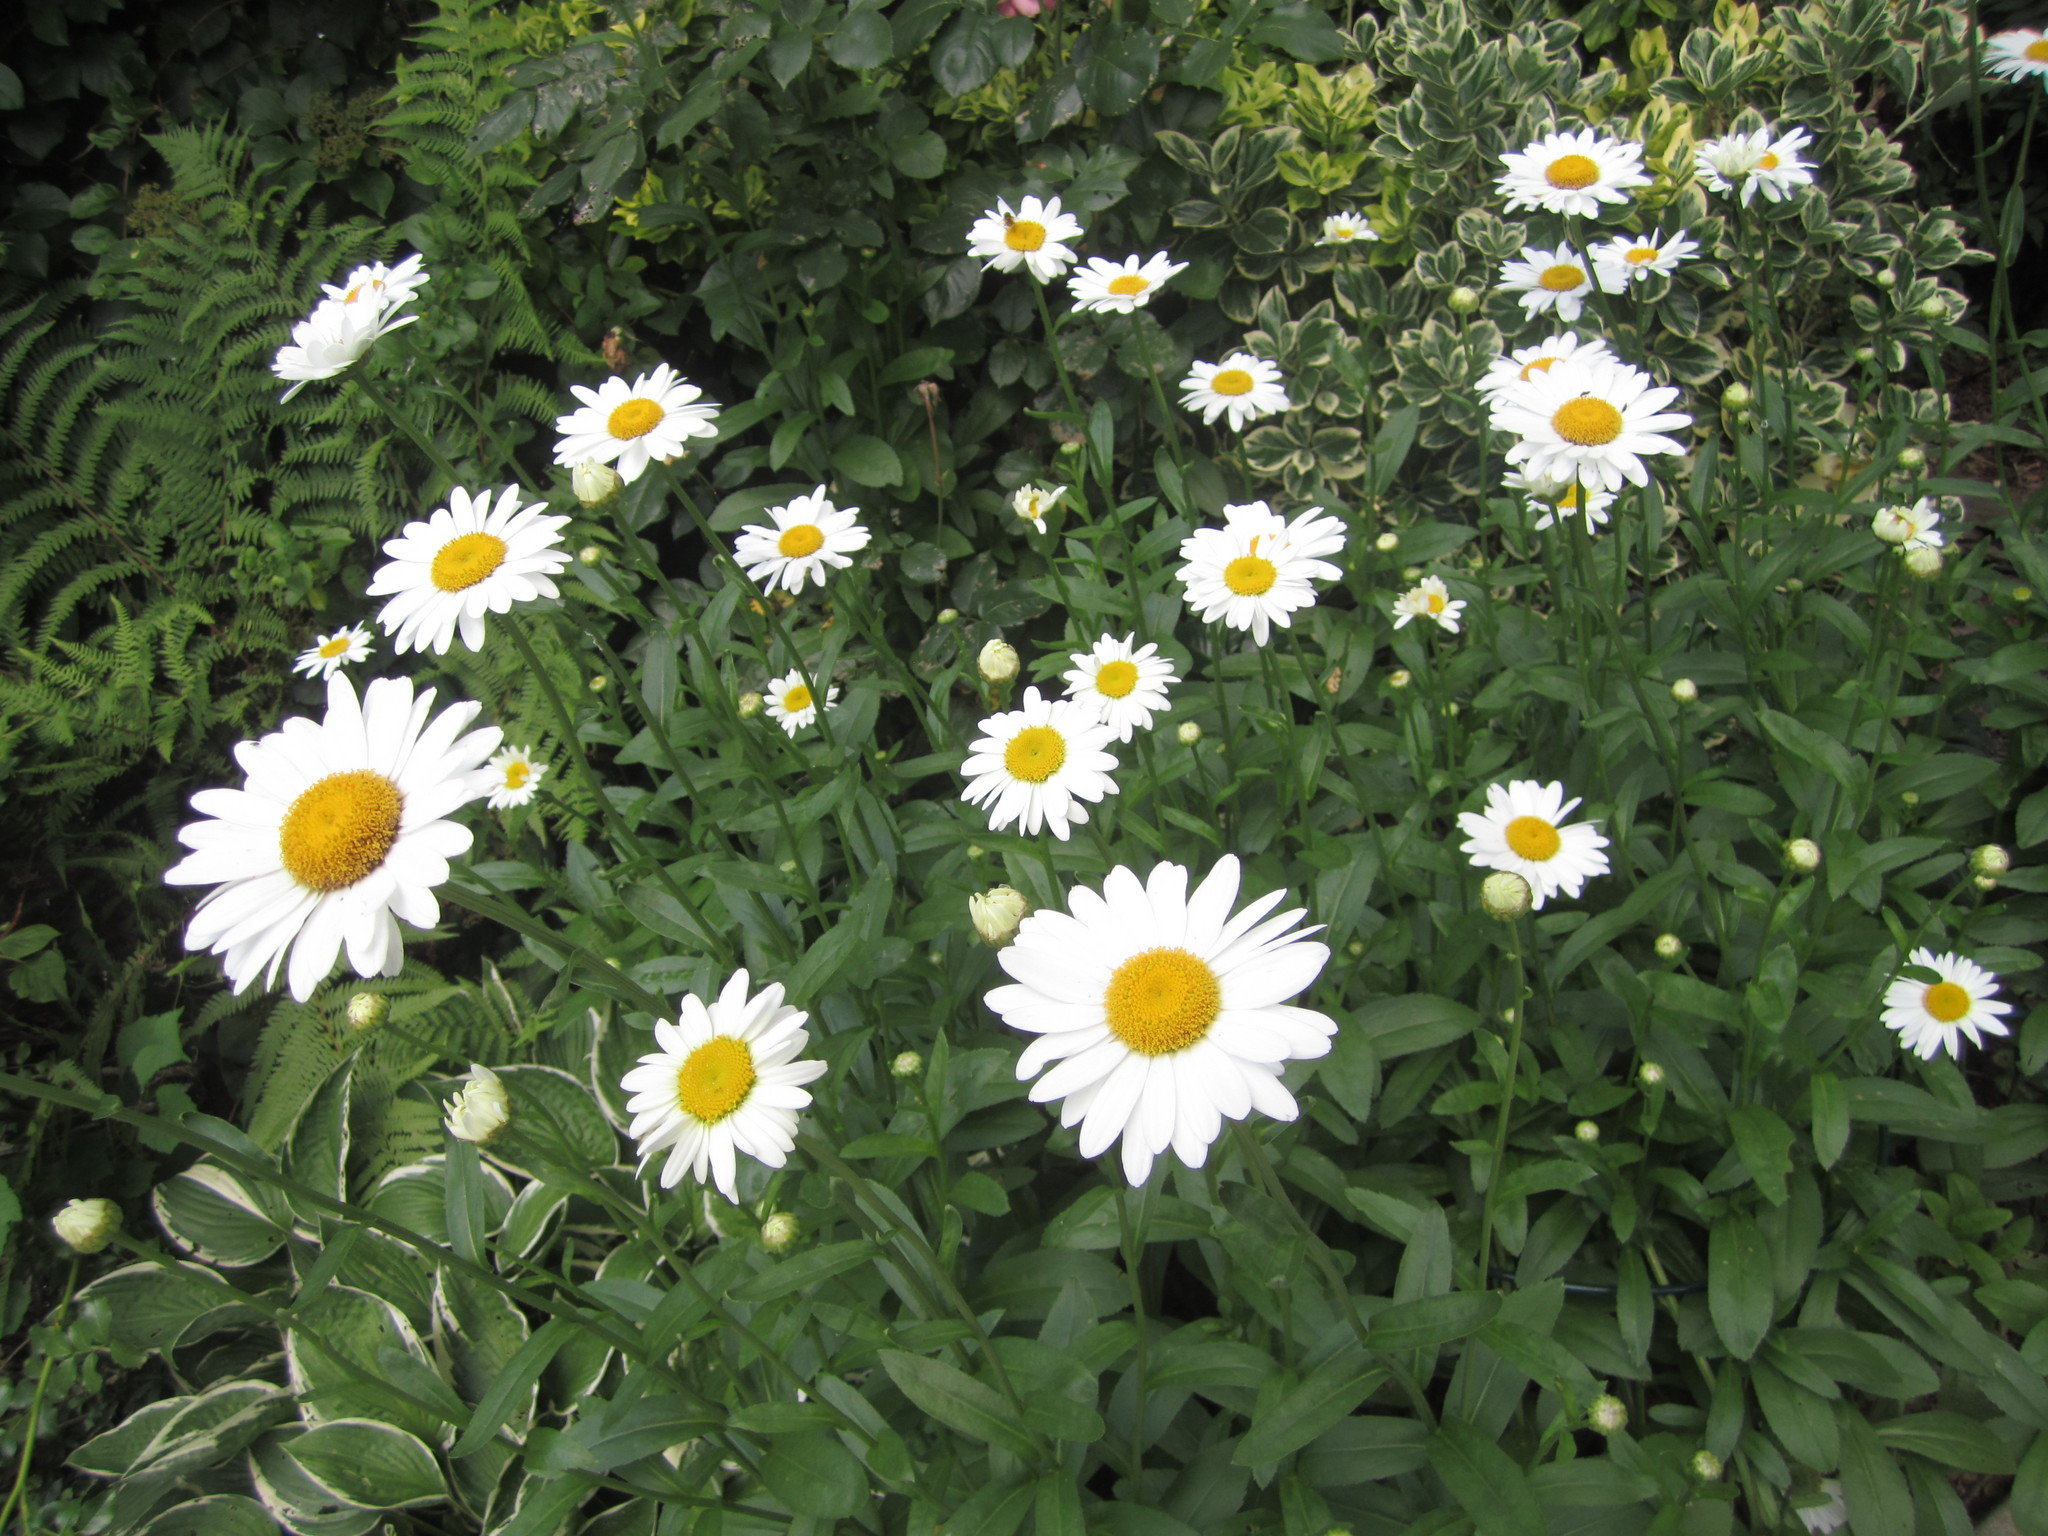 Shasta daisies are garden show-stoppers | SILive.com